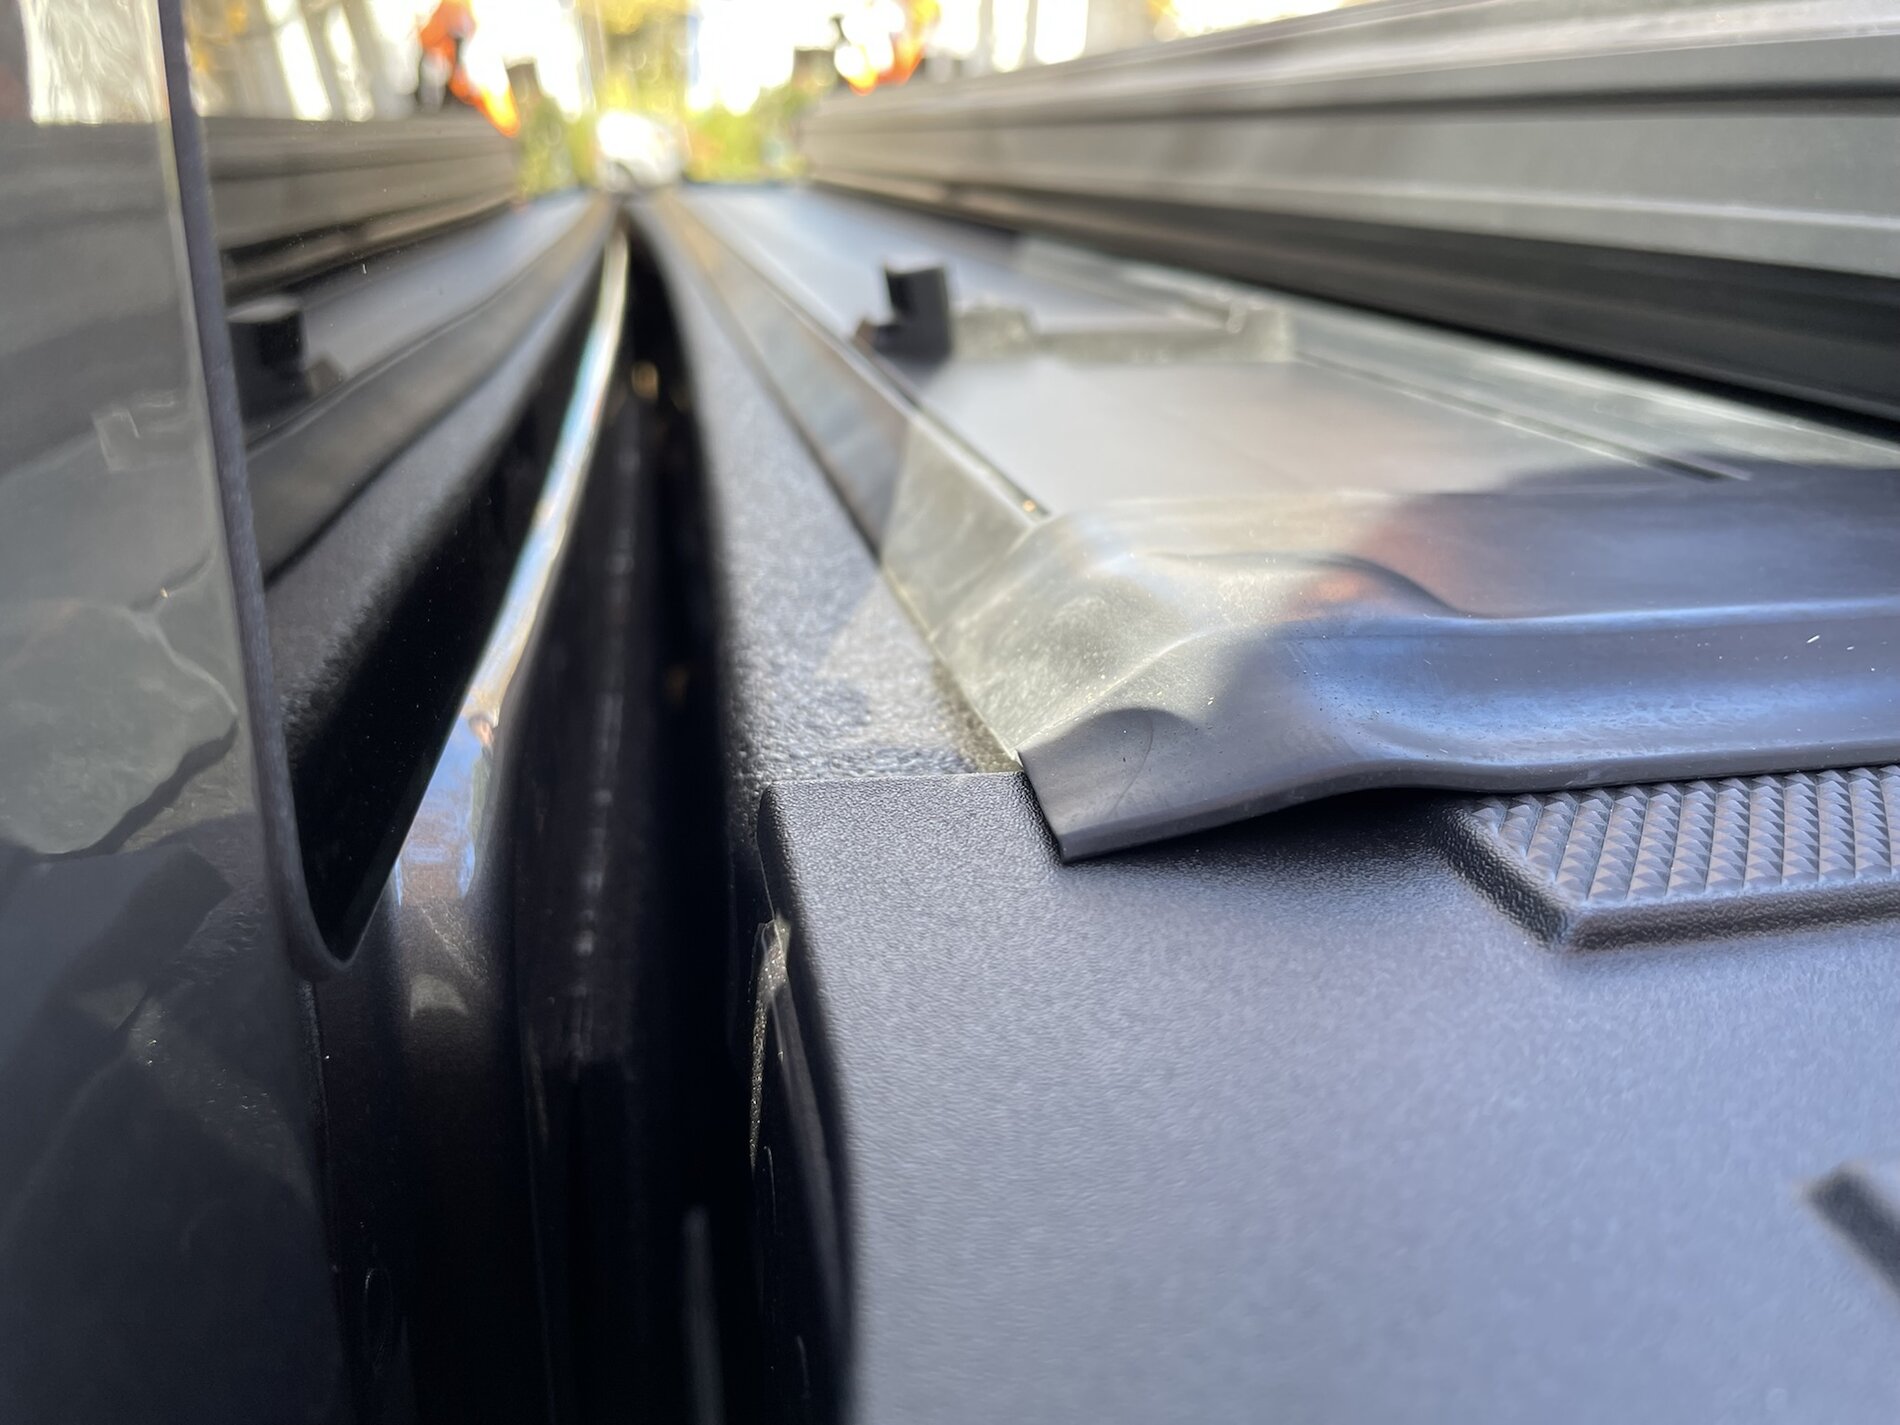 Ford F-150 Lightning Leer HF650M Tonneau Cover Review with Photos! - Install & First Impressions IMG_6465.JPEG